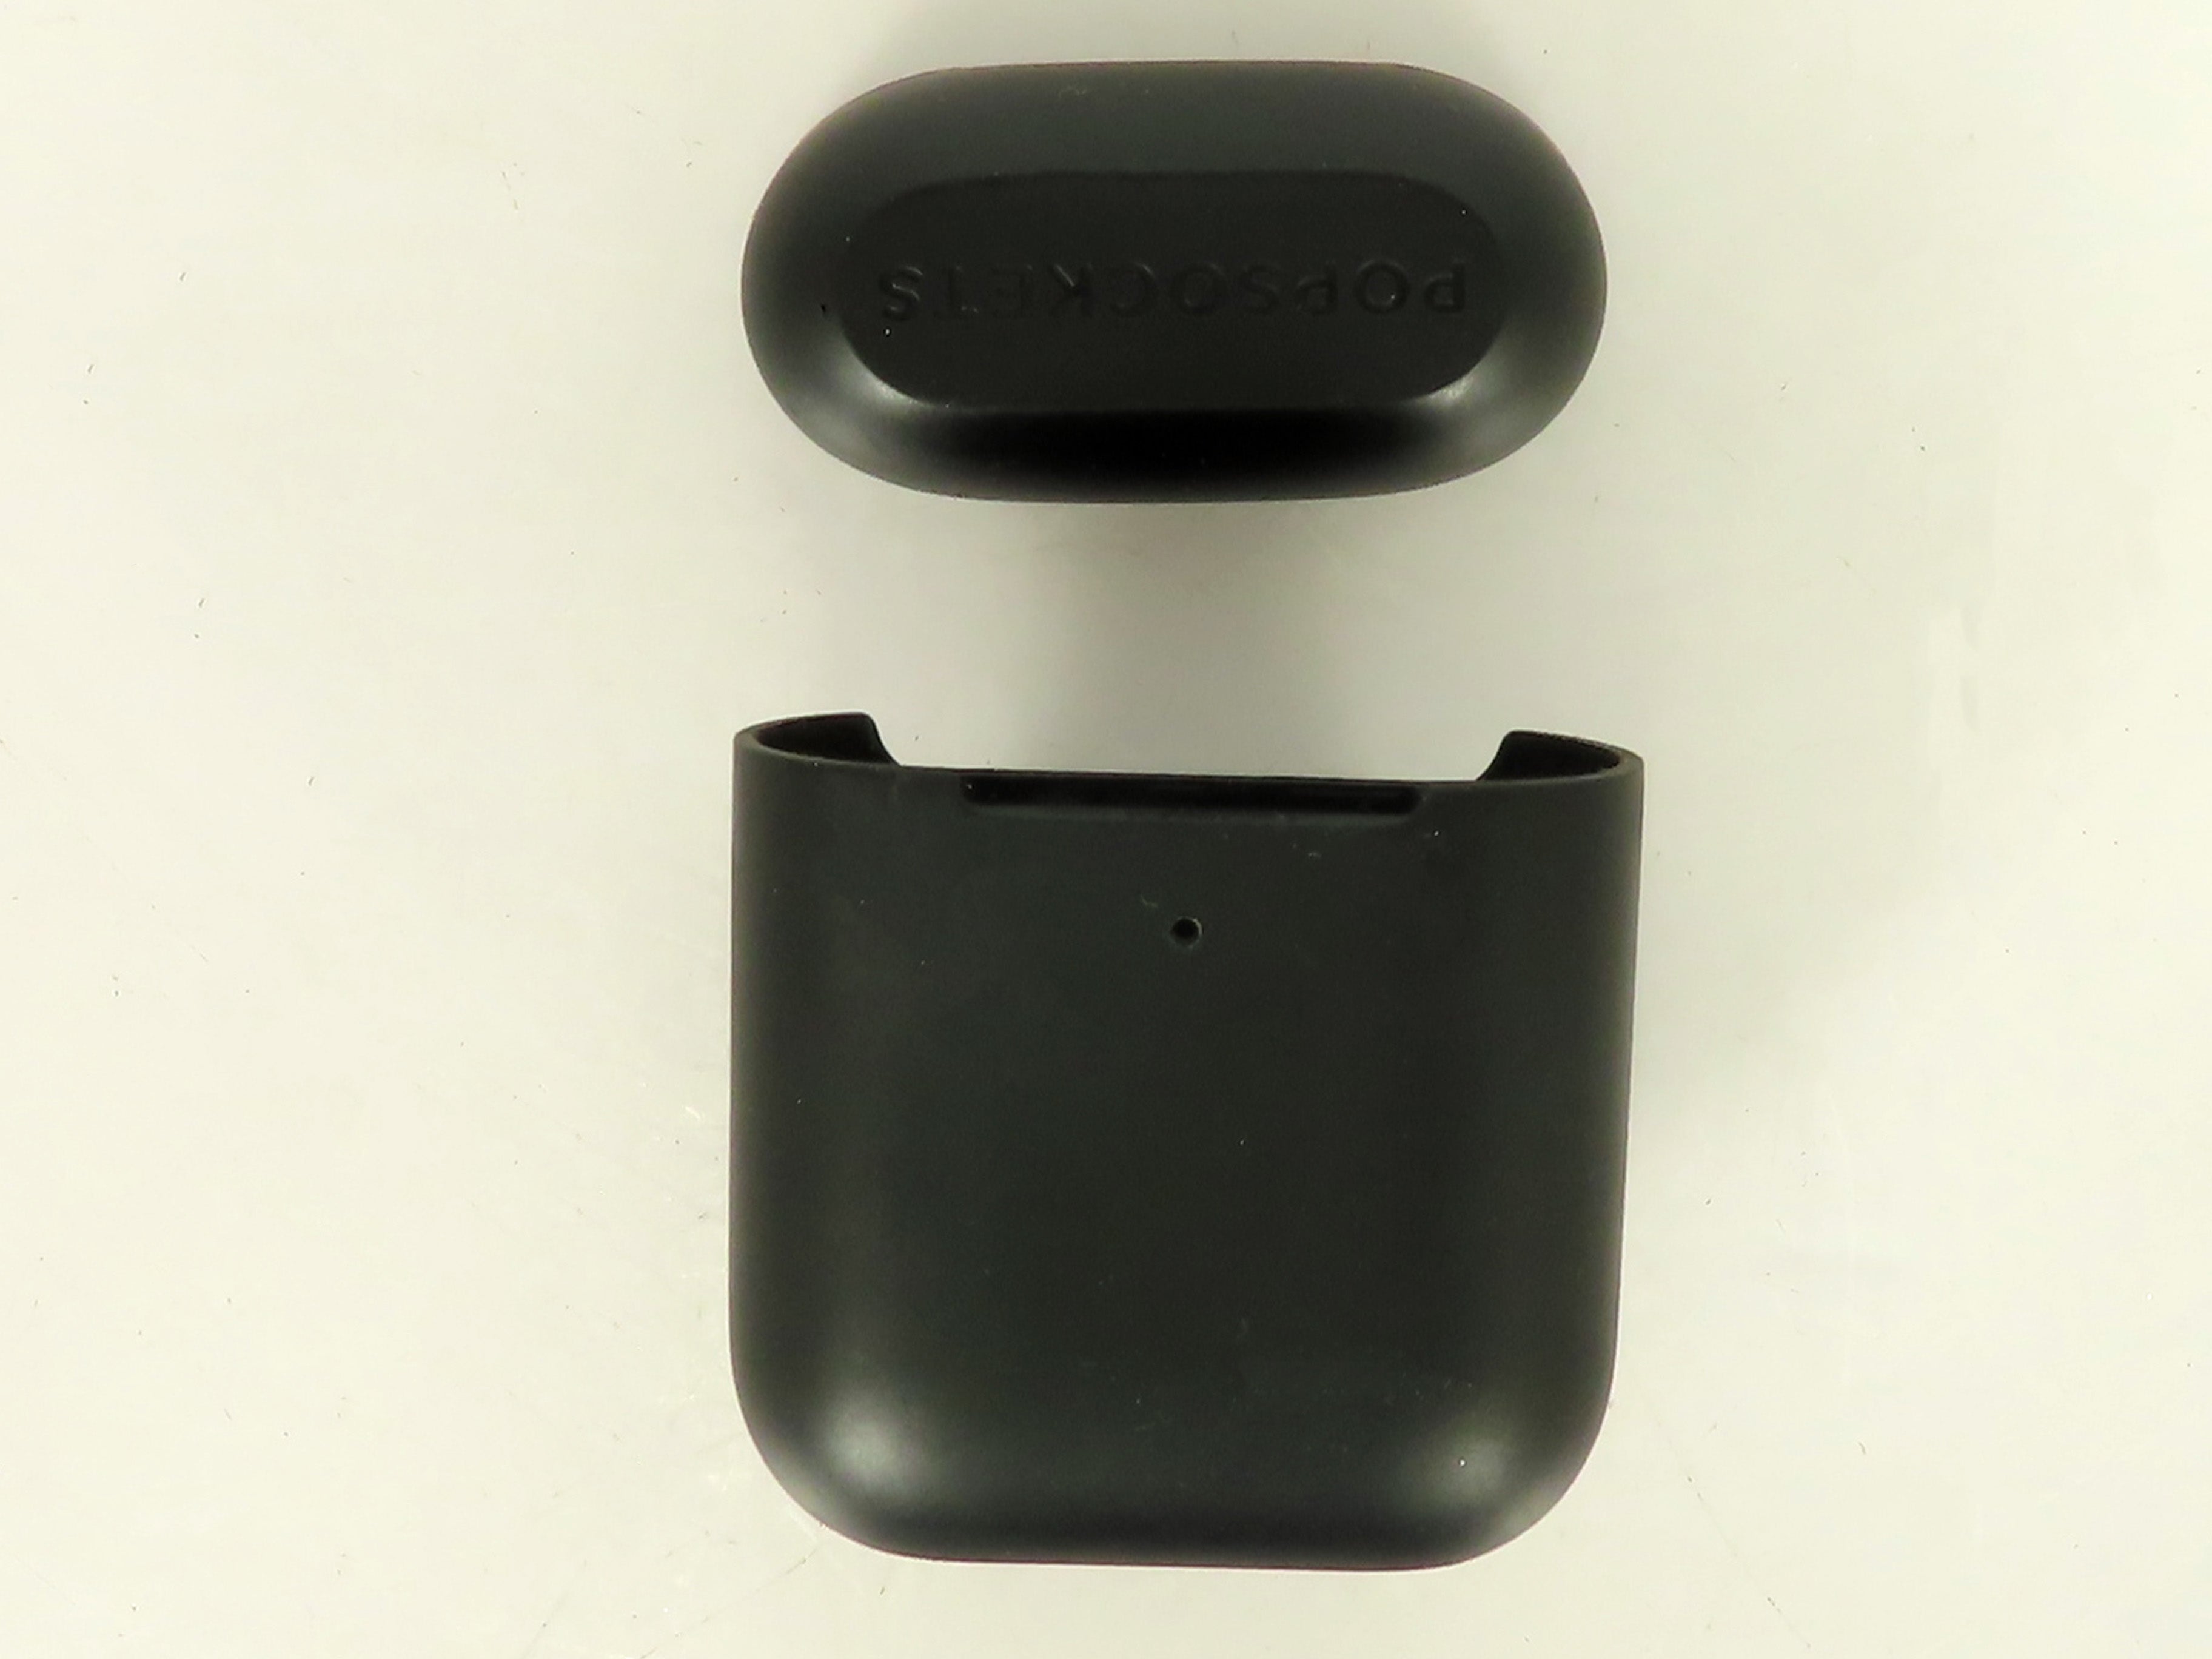 Apple AirPods 1/2 Popsockets Silicone Case - Black